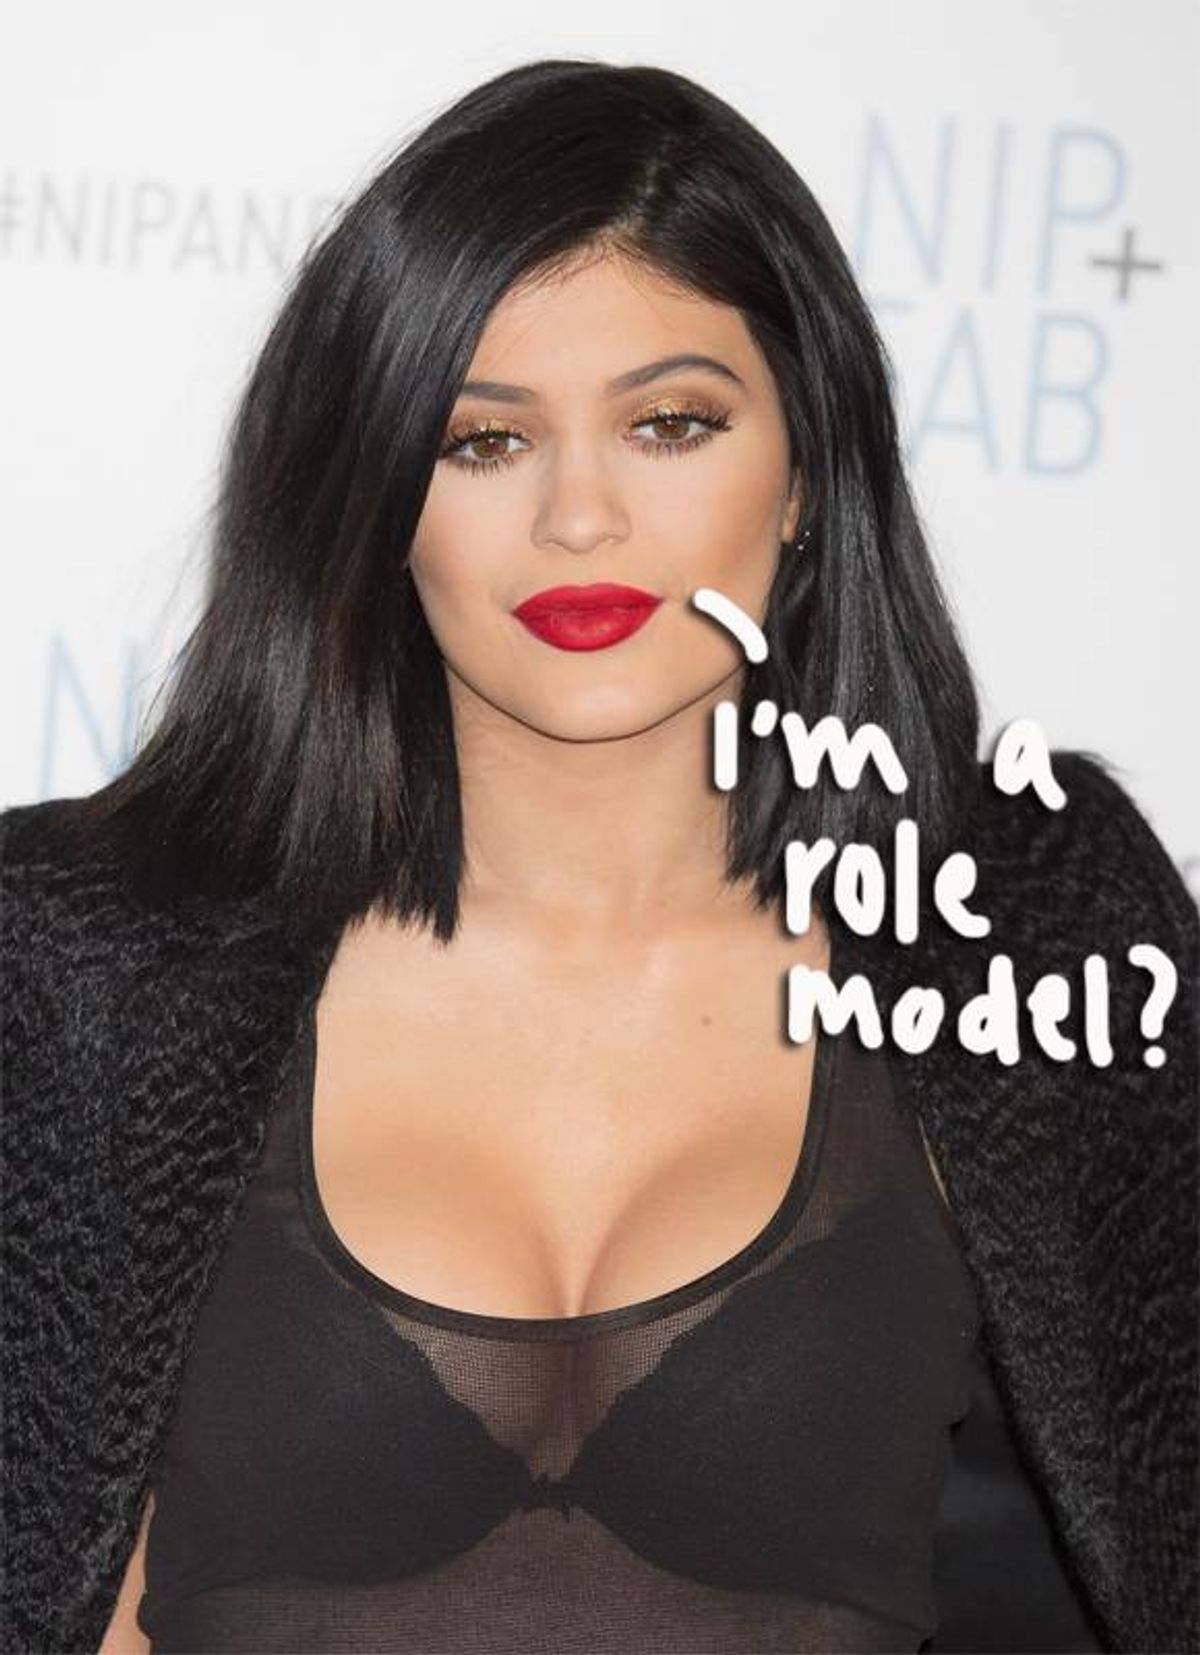 Kylie Jenner: Worst Role Model For Young Girls